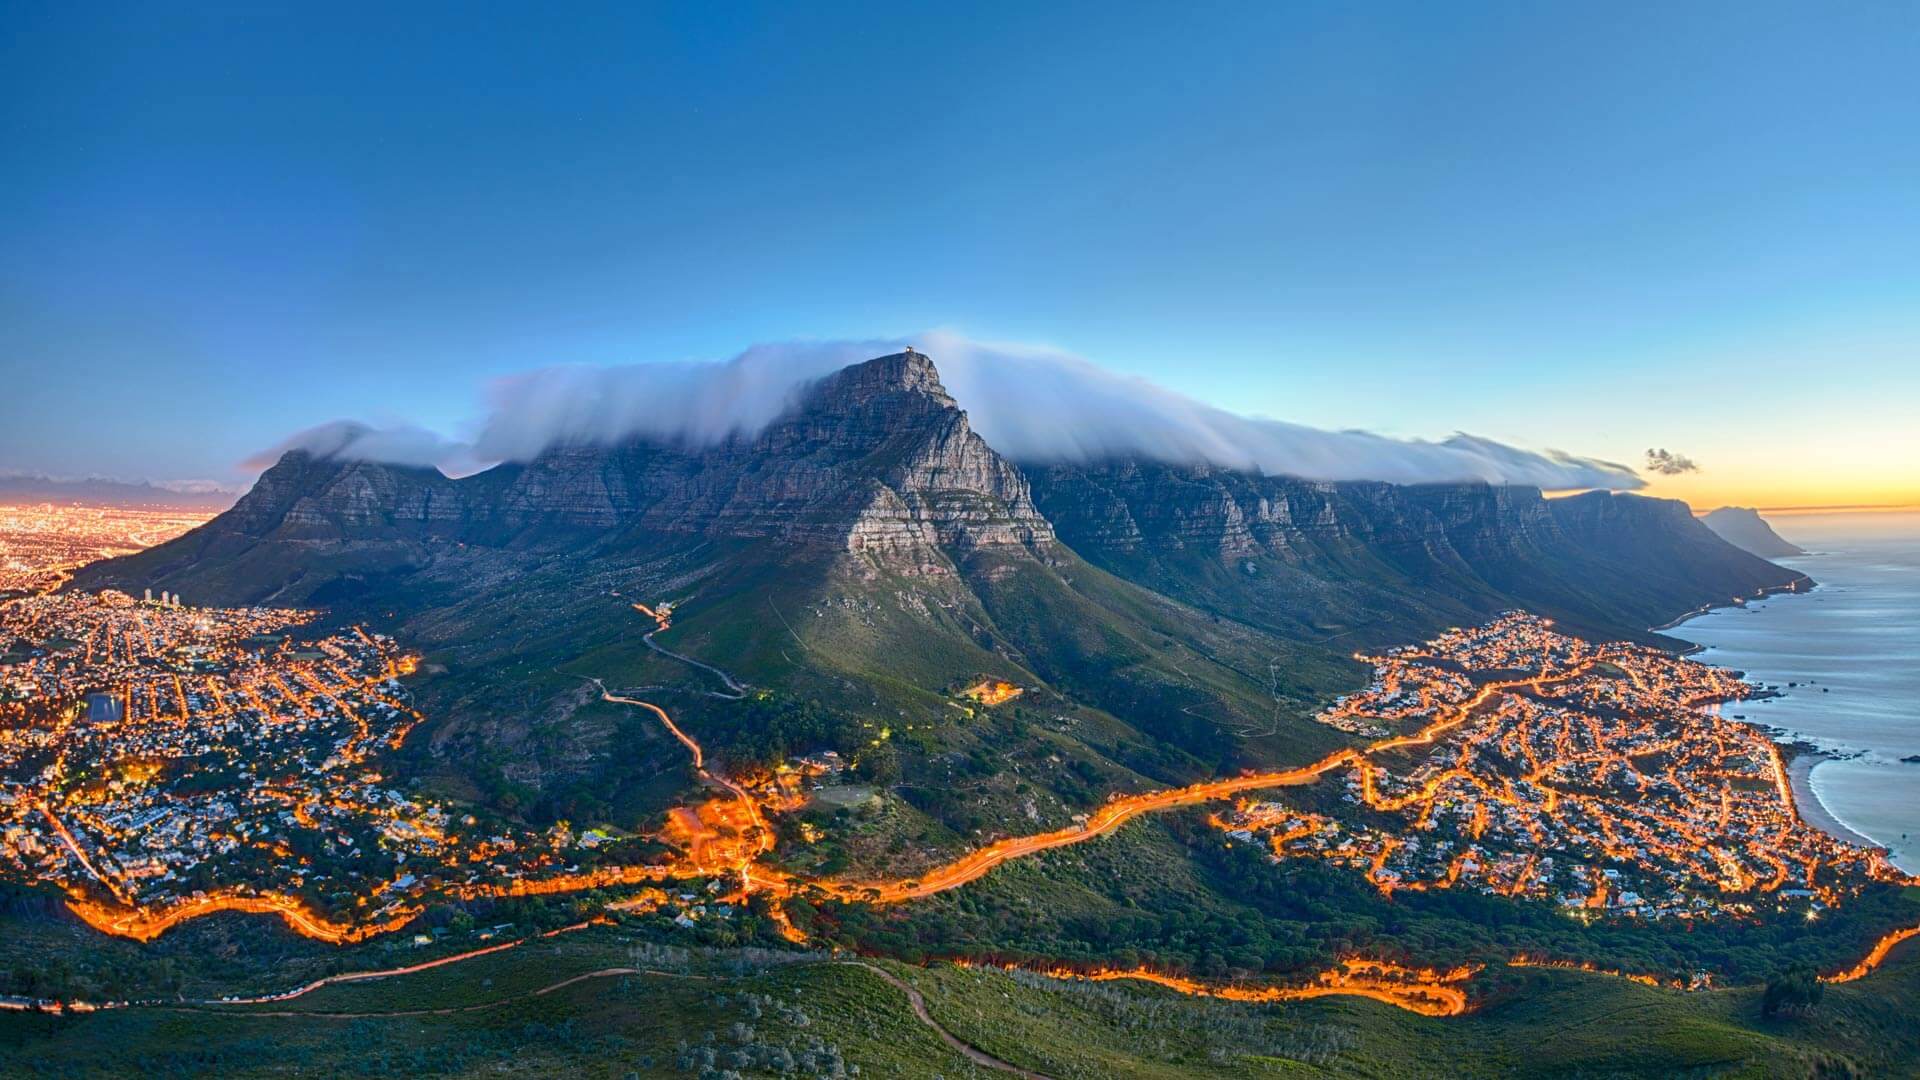 Cape Town at dusk by Microsoft